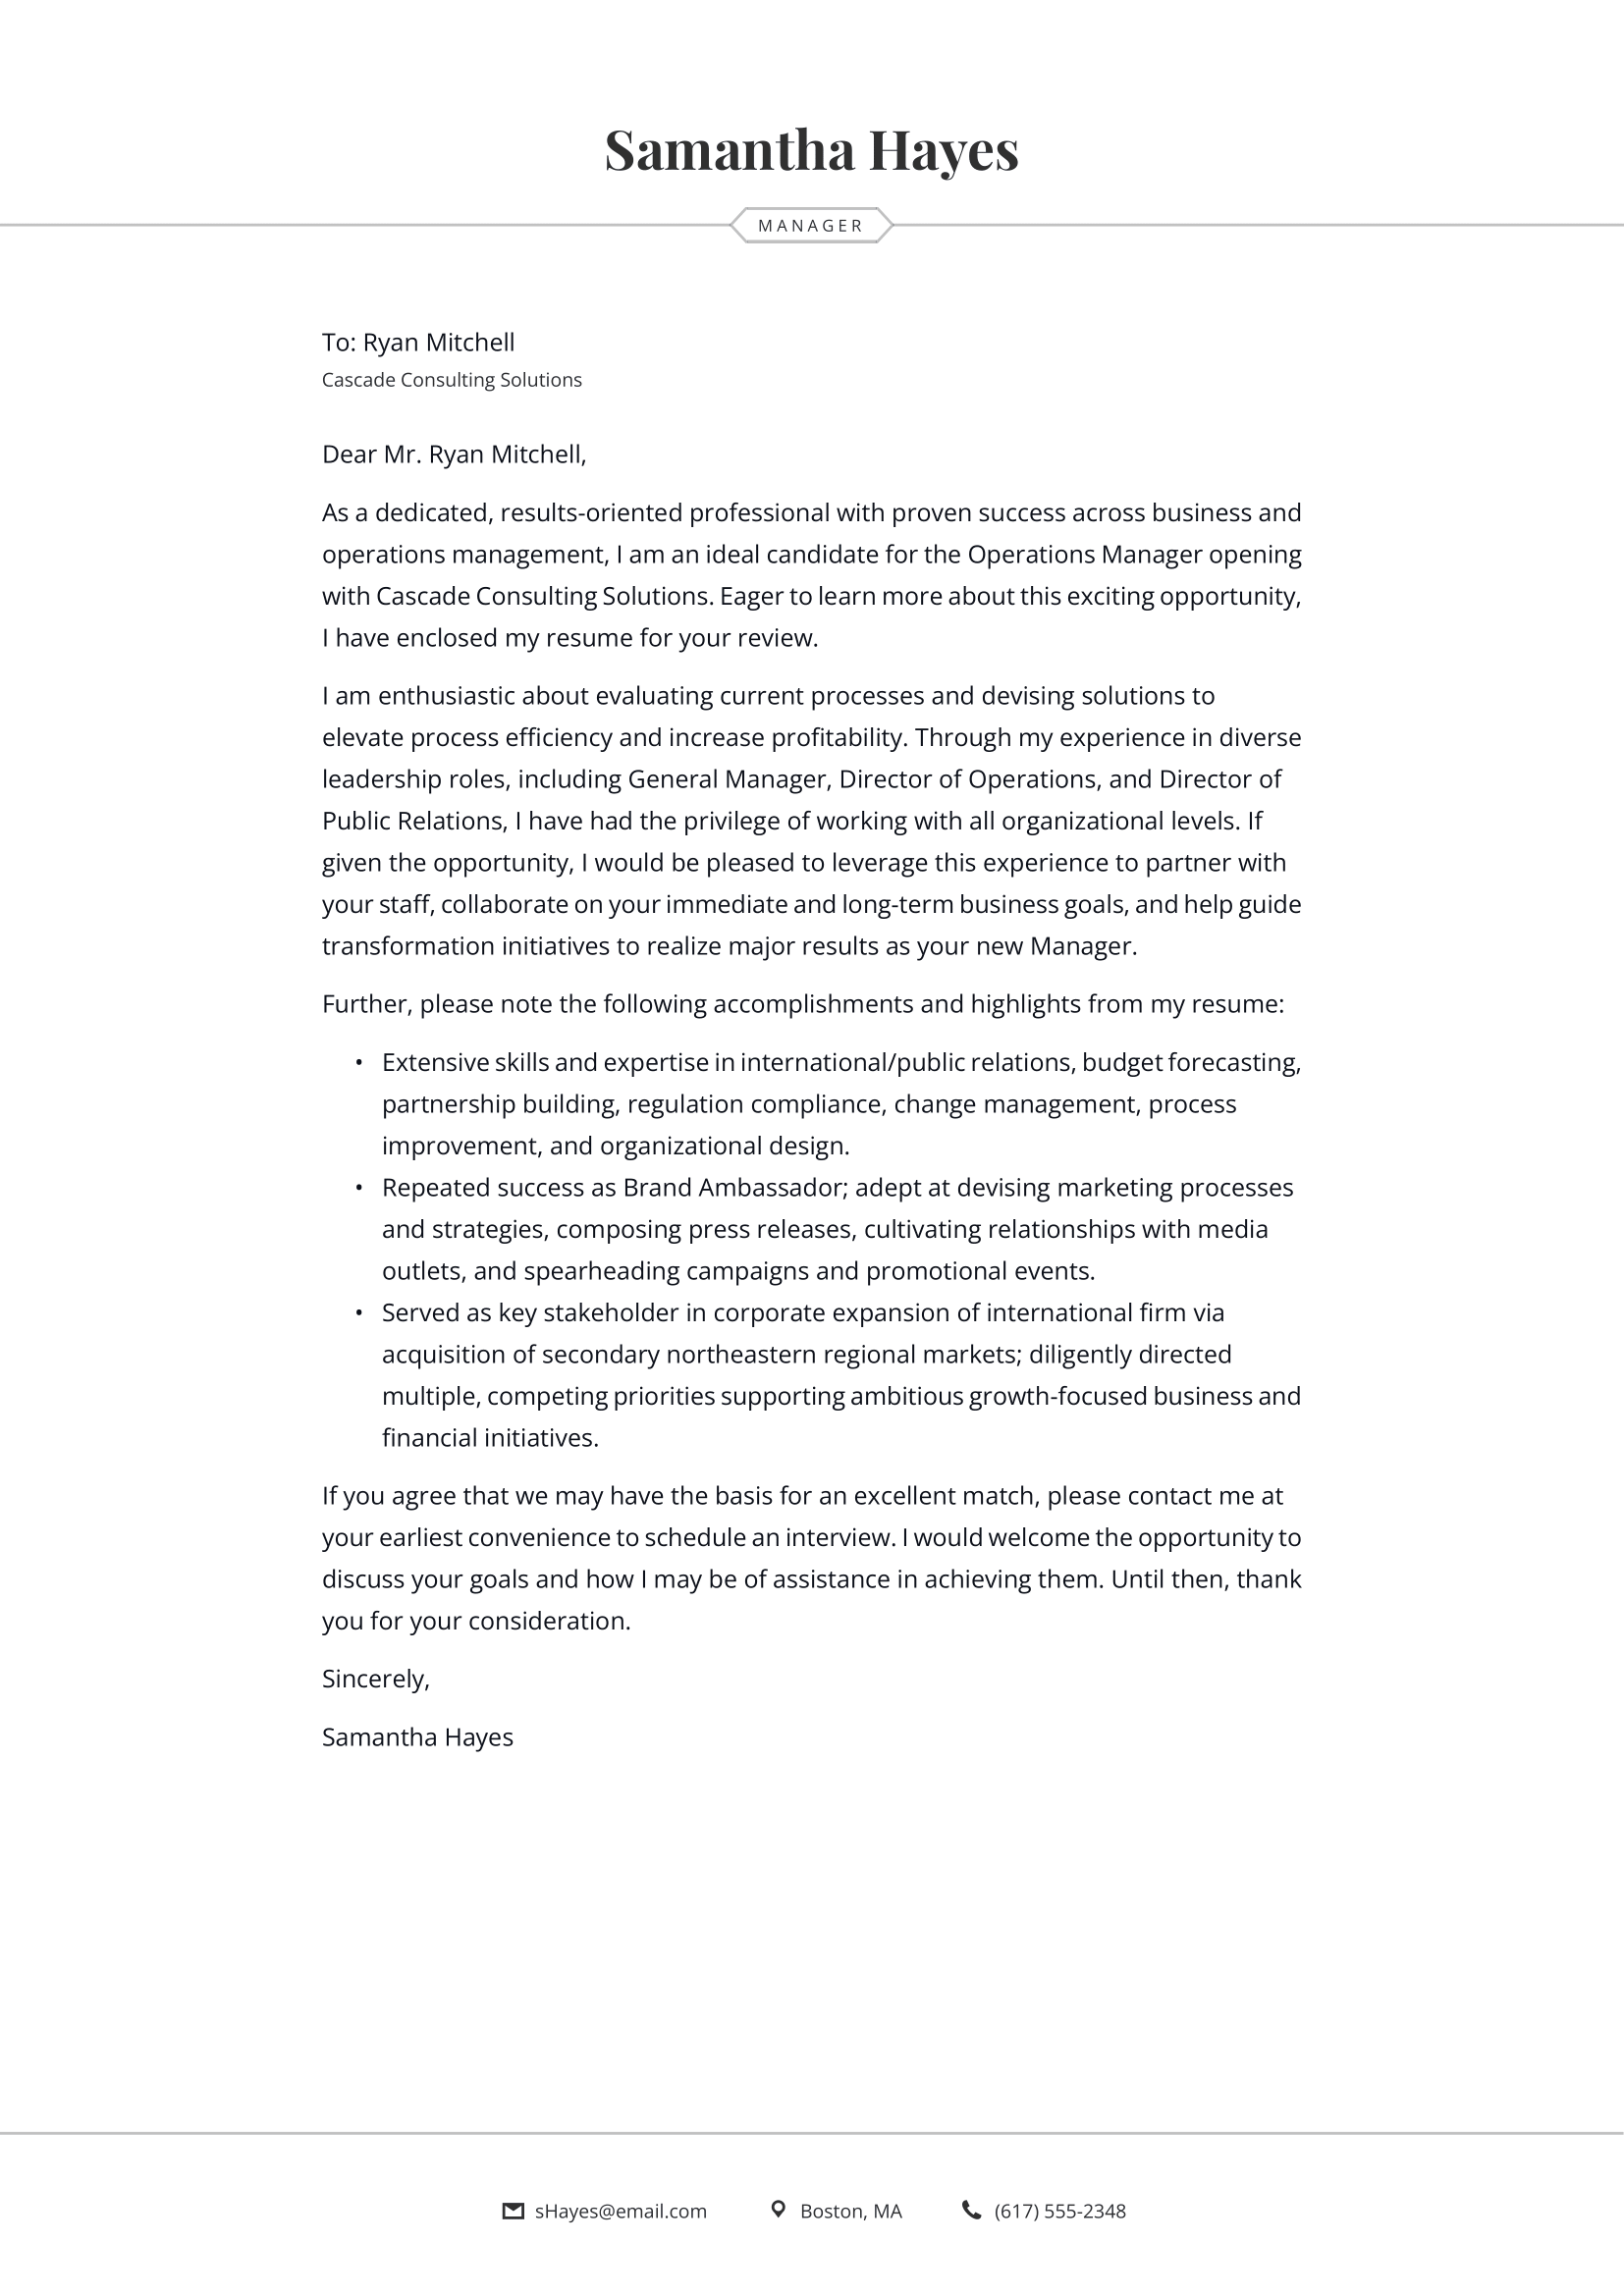 Manager Cover Letter Example & Writing Guide